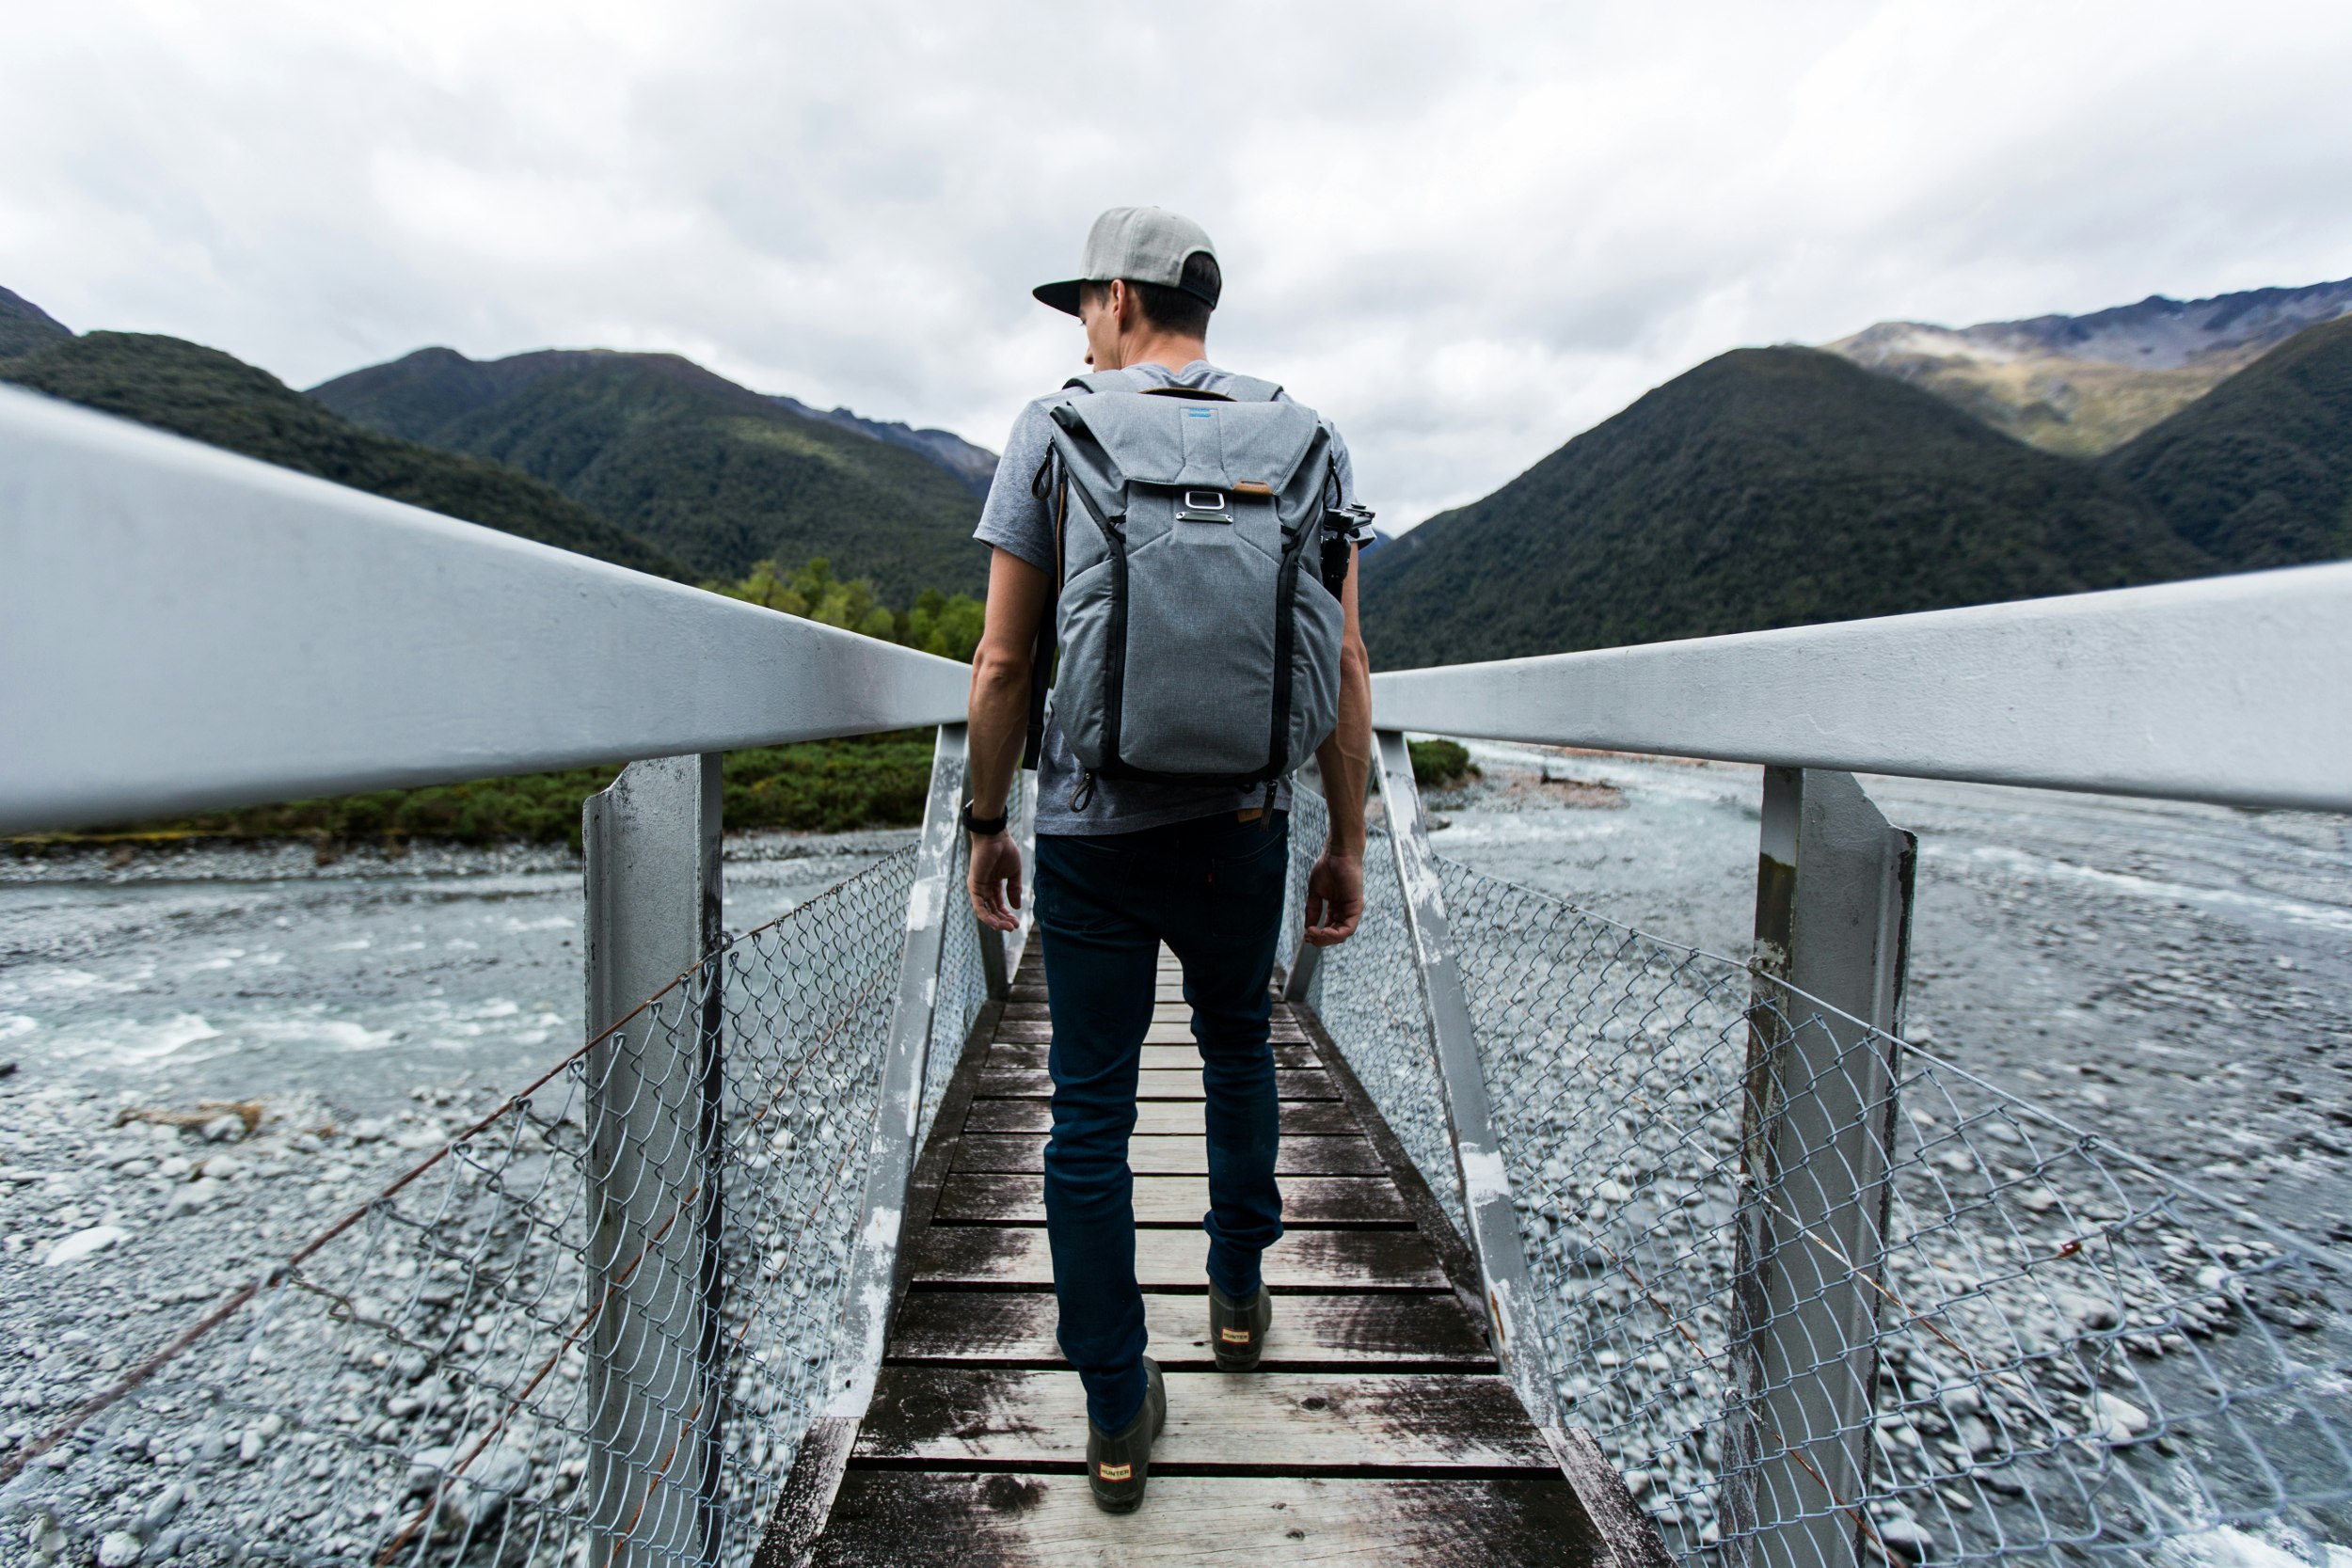 A man wearing an Everyday backpack is going across a walkway with wooden rails. The ground either side of him is covered in gravel, mountains are in the near distance. 